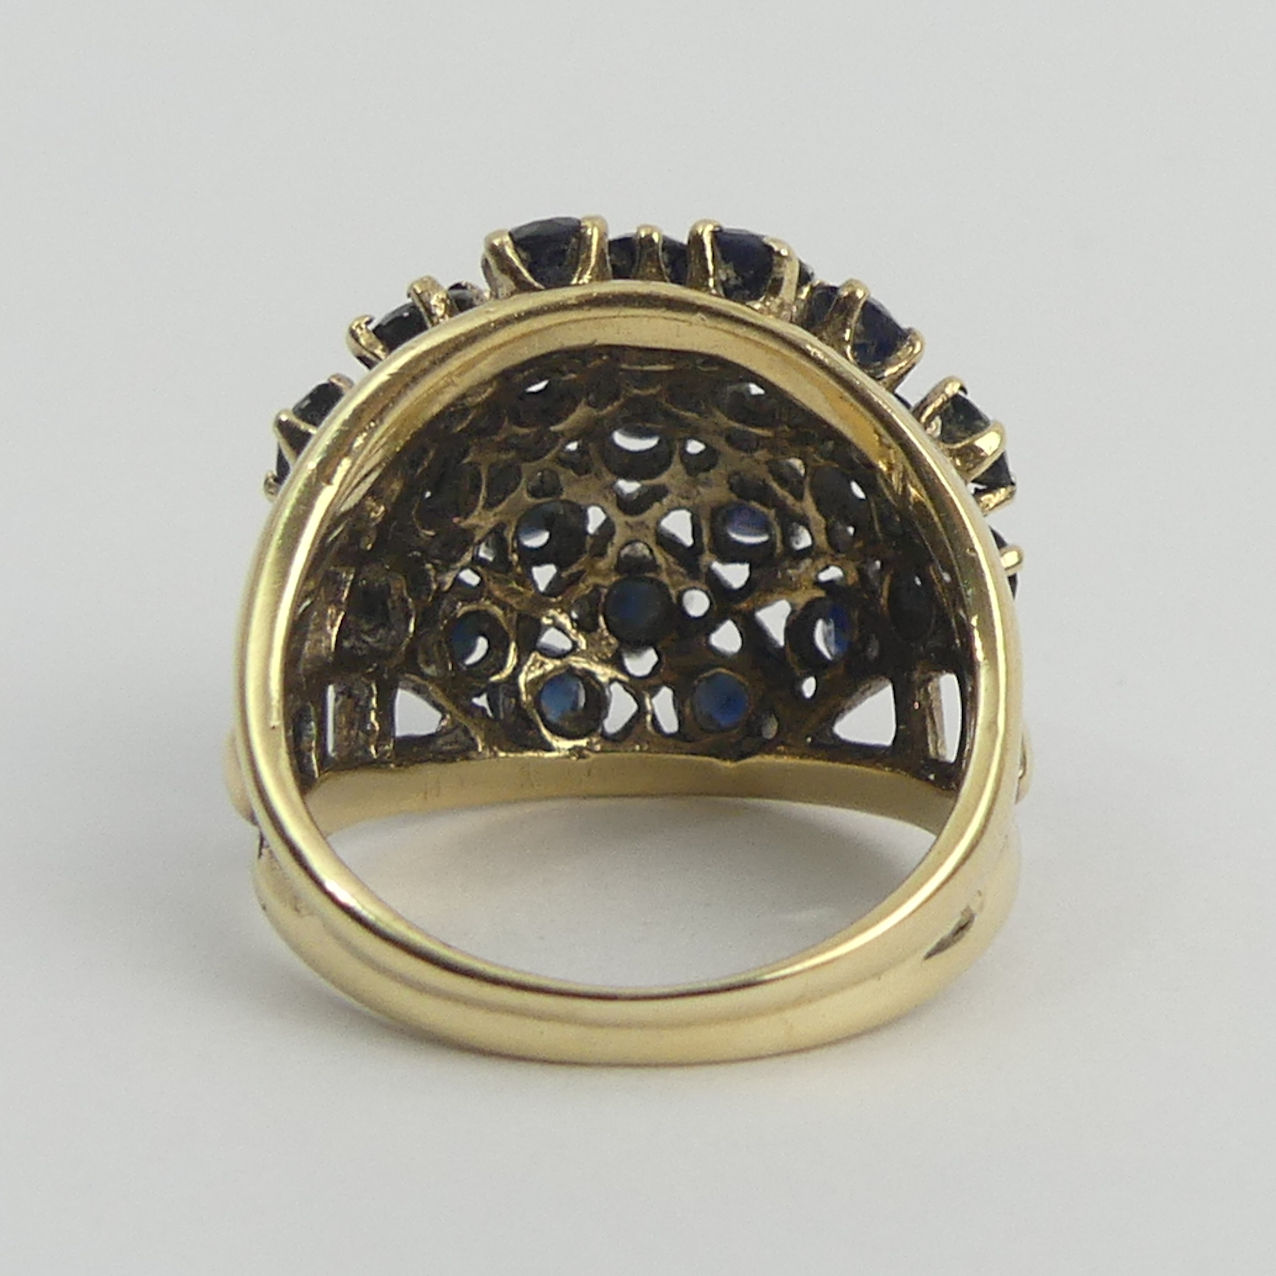 9ct gold sapphire bombe design ring, 7.5 grams, Birm.1963. Size M, 18.5 mm. UK Postage £12. - Image 4 of 5